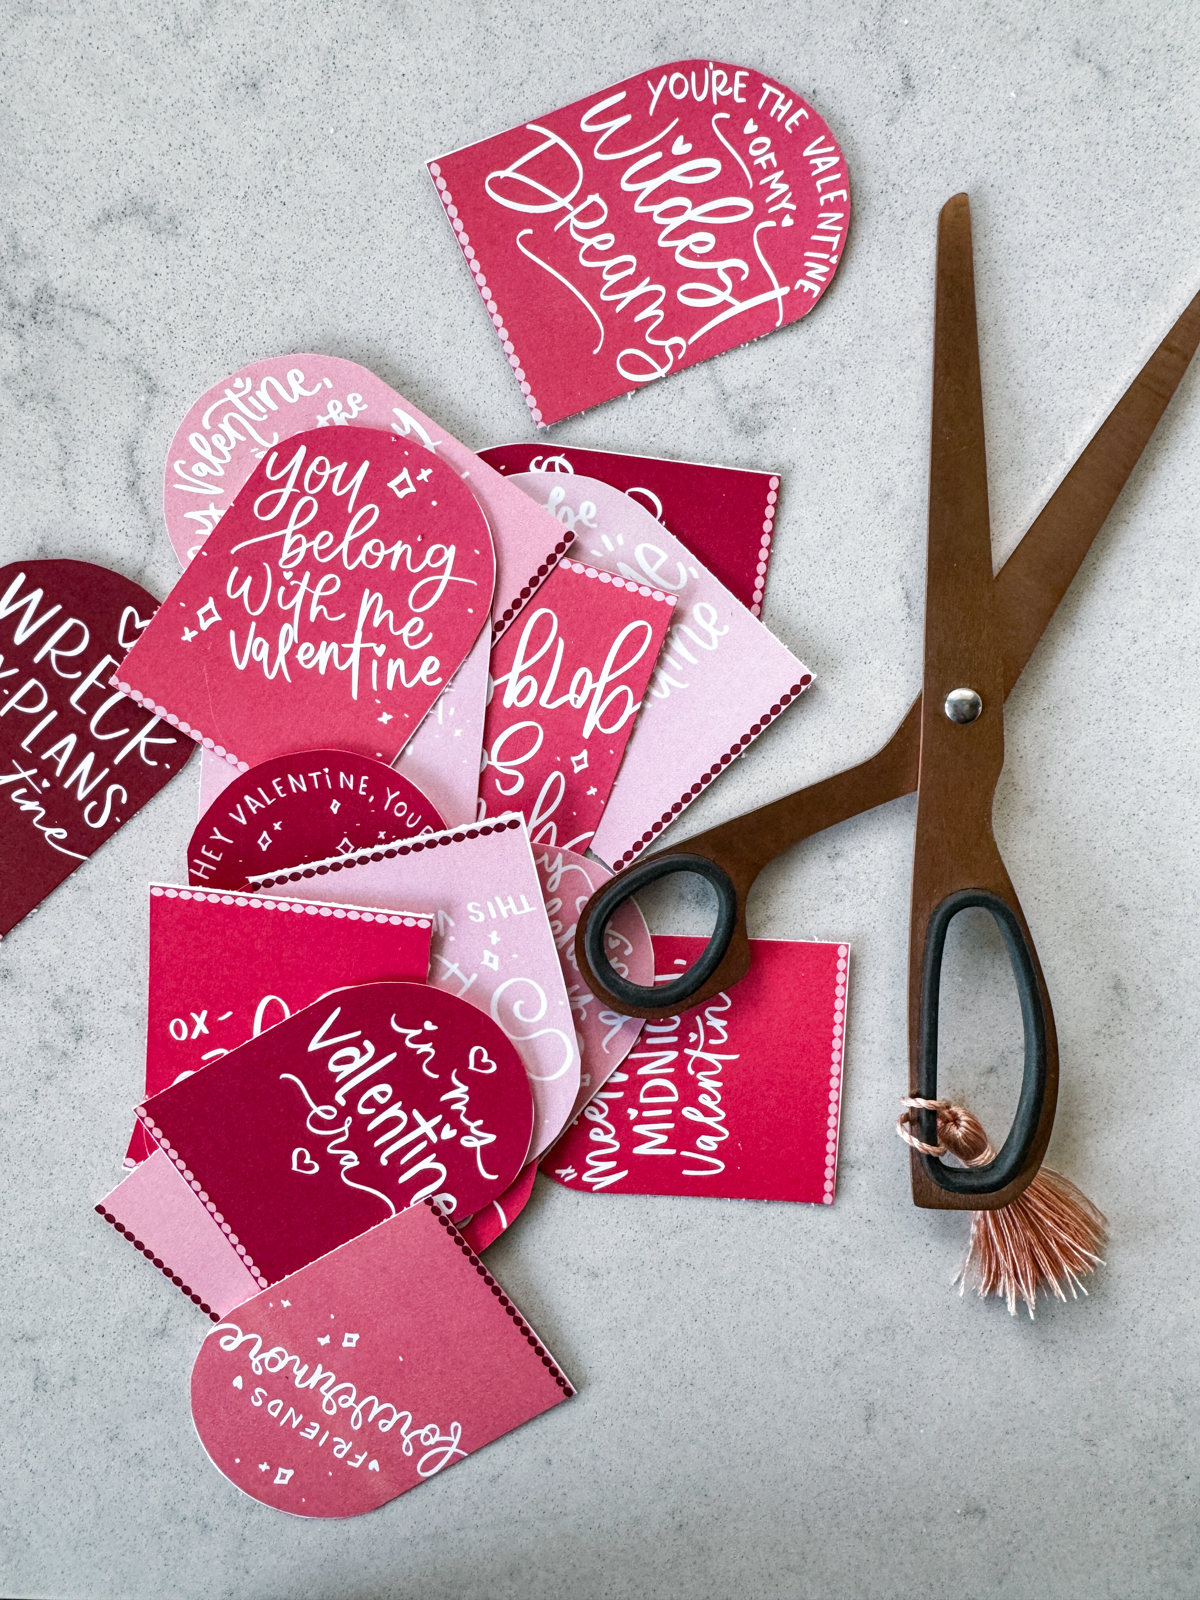 taylor swift themed valentines day cards printed and cut to size (pink and deep burgundy color with white hand lettered song lyrics) shown on marble countertop with rose gold scissors. some valentines read: you're the valentine of my wildest dreams, you belong with me valentine, in my valentine era, friends forevermore